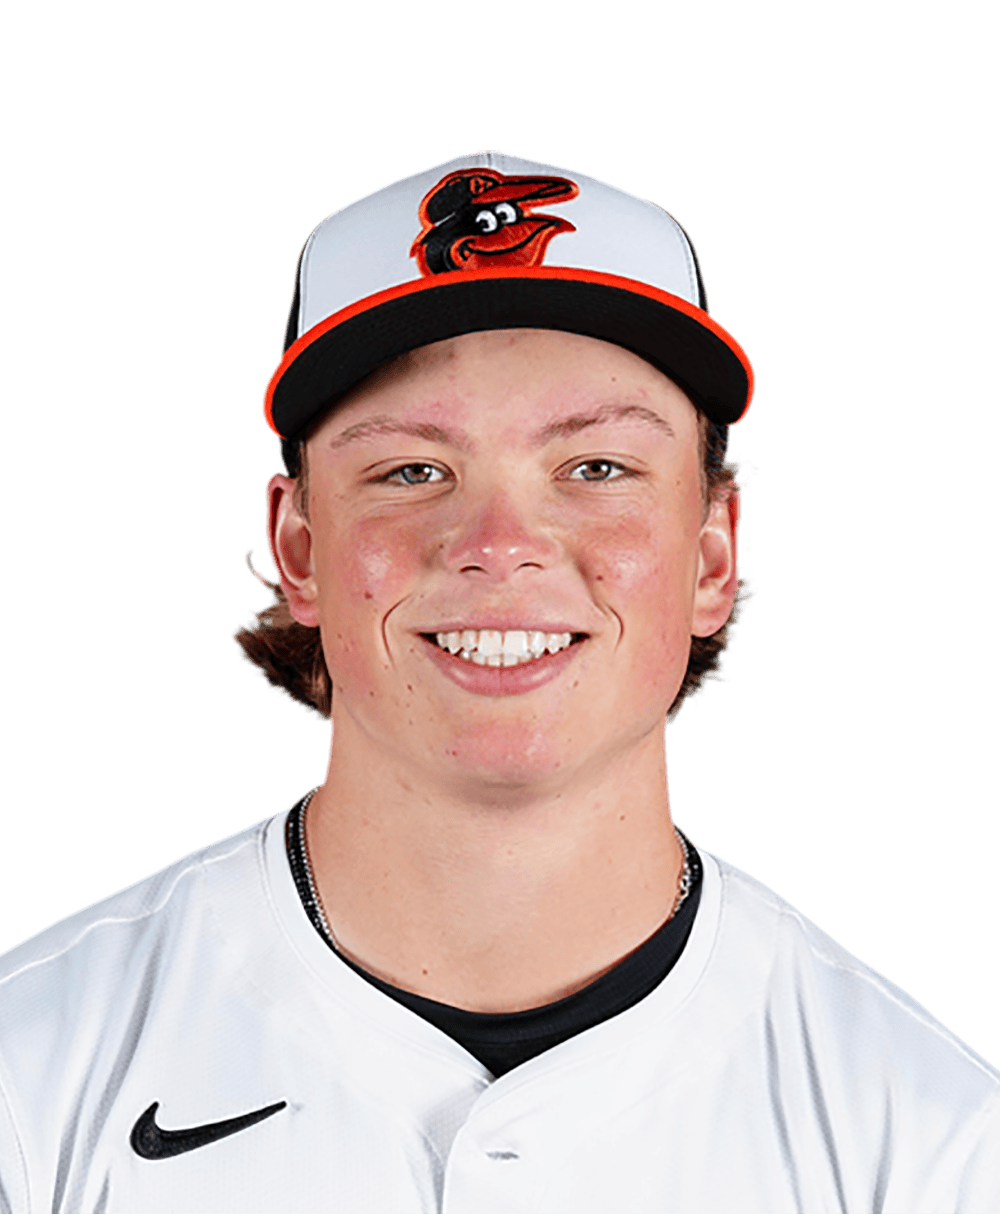 Jackson Holliday Promoted to High-A in Orioles Organization after